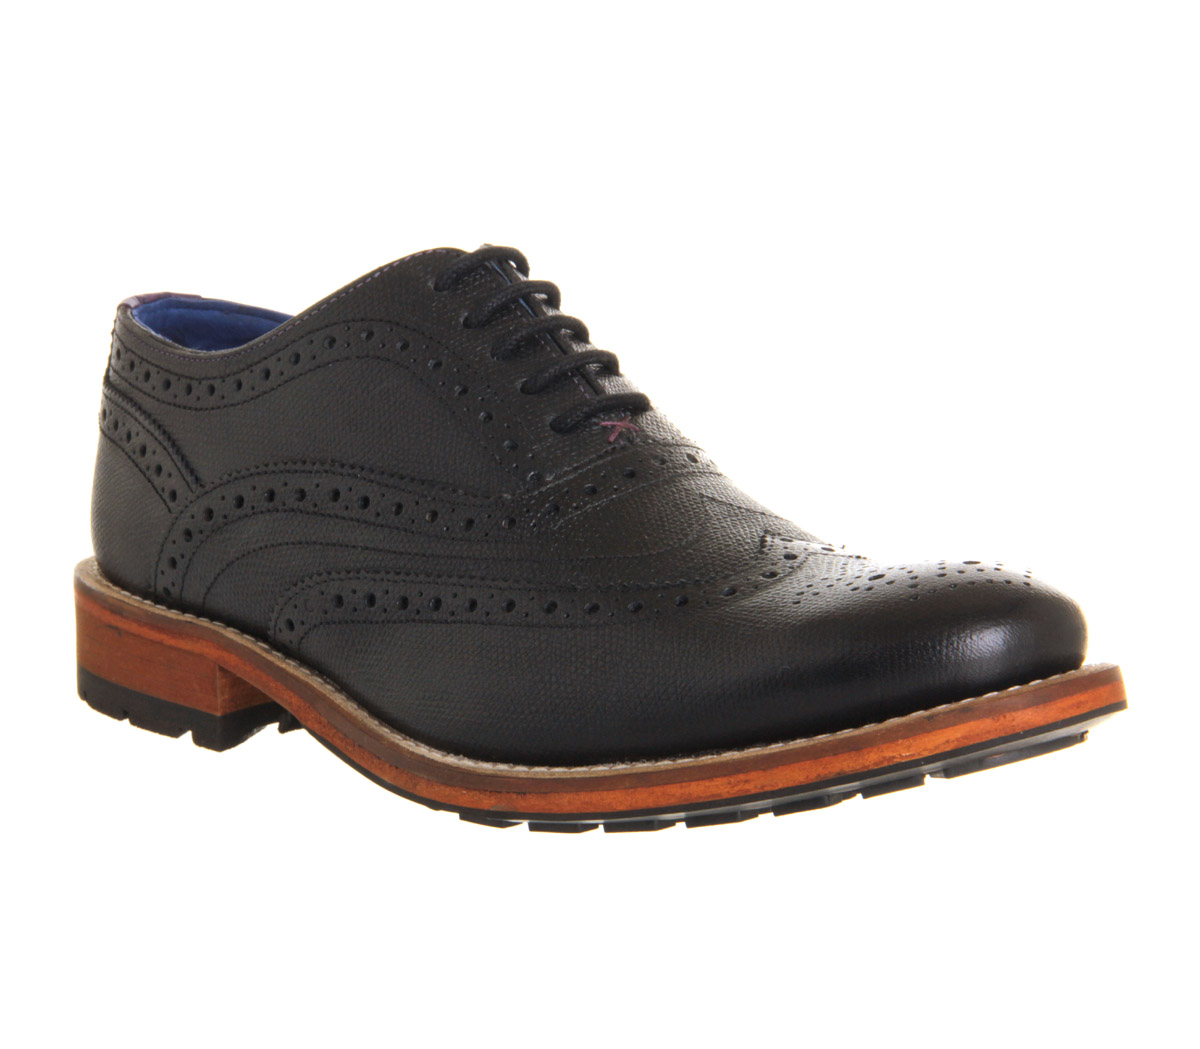 Ted Baker Guri 7 Brogues Black Leather 